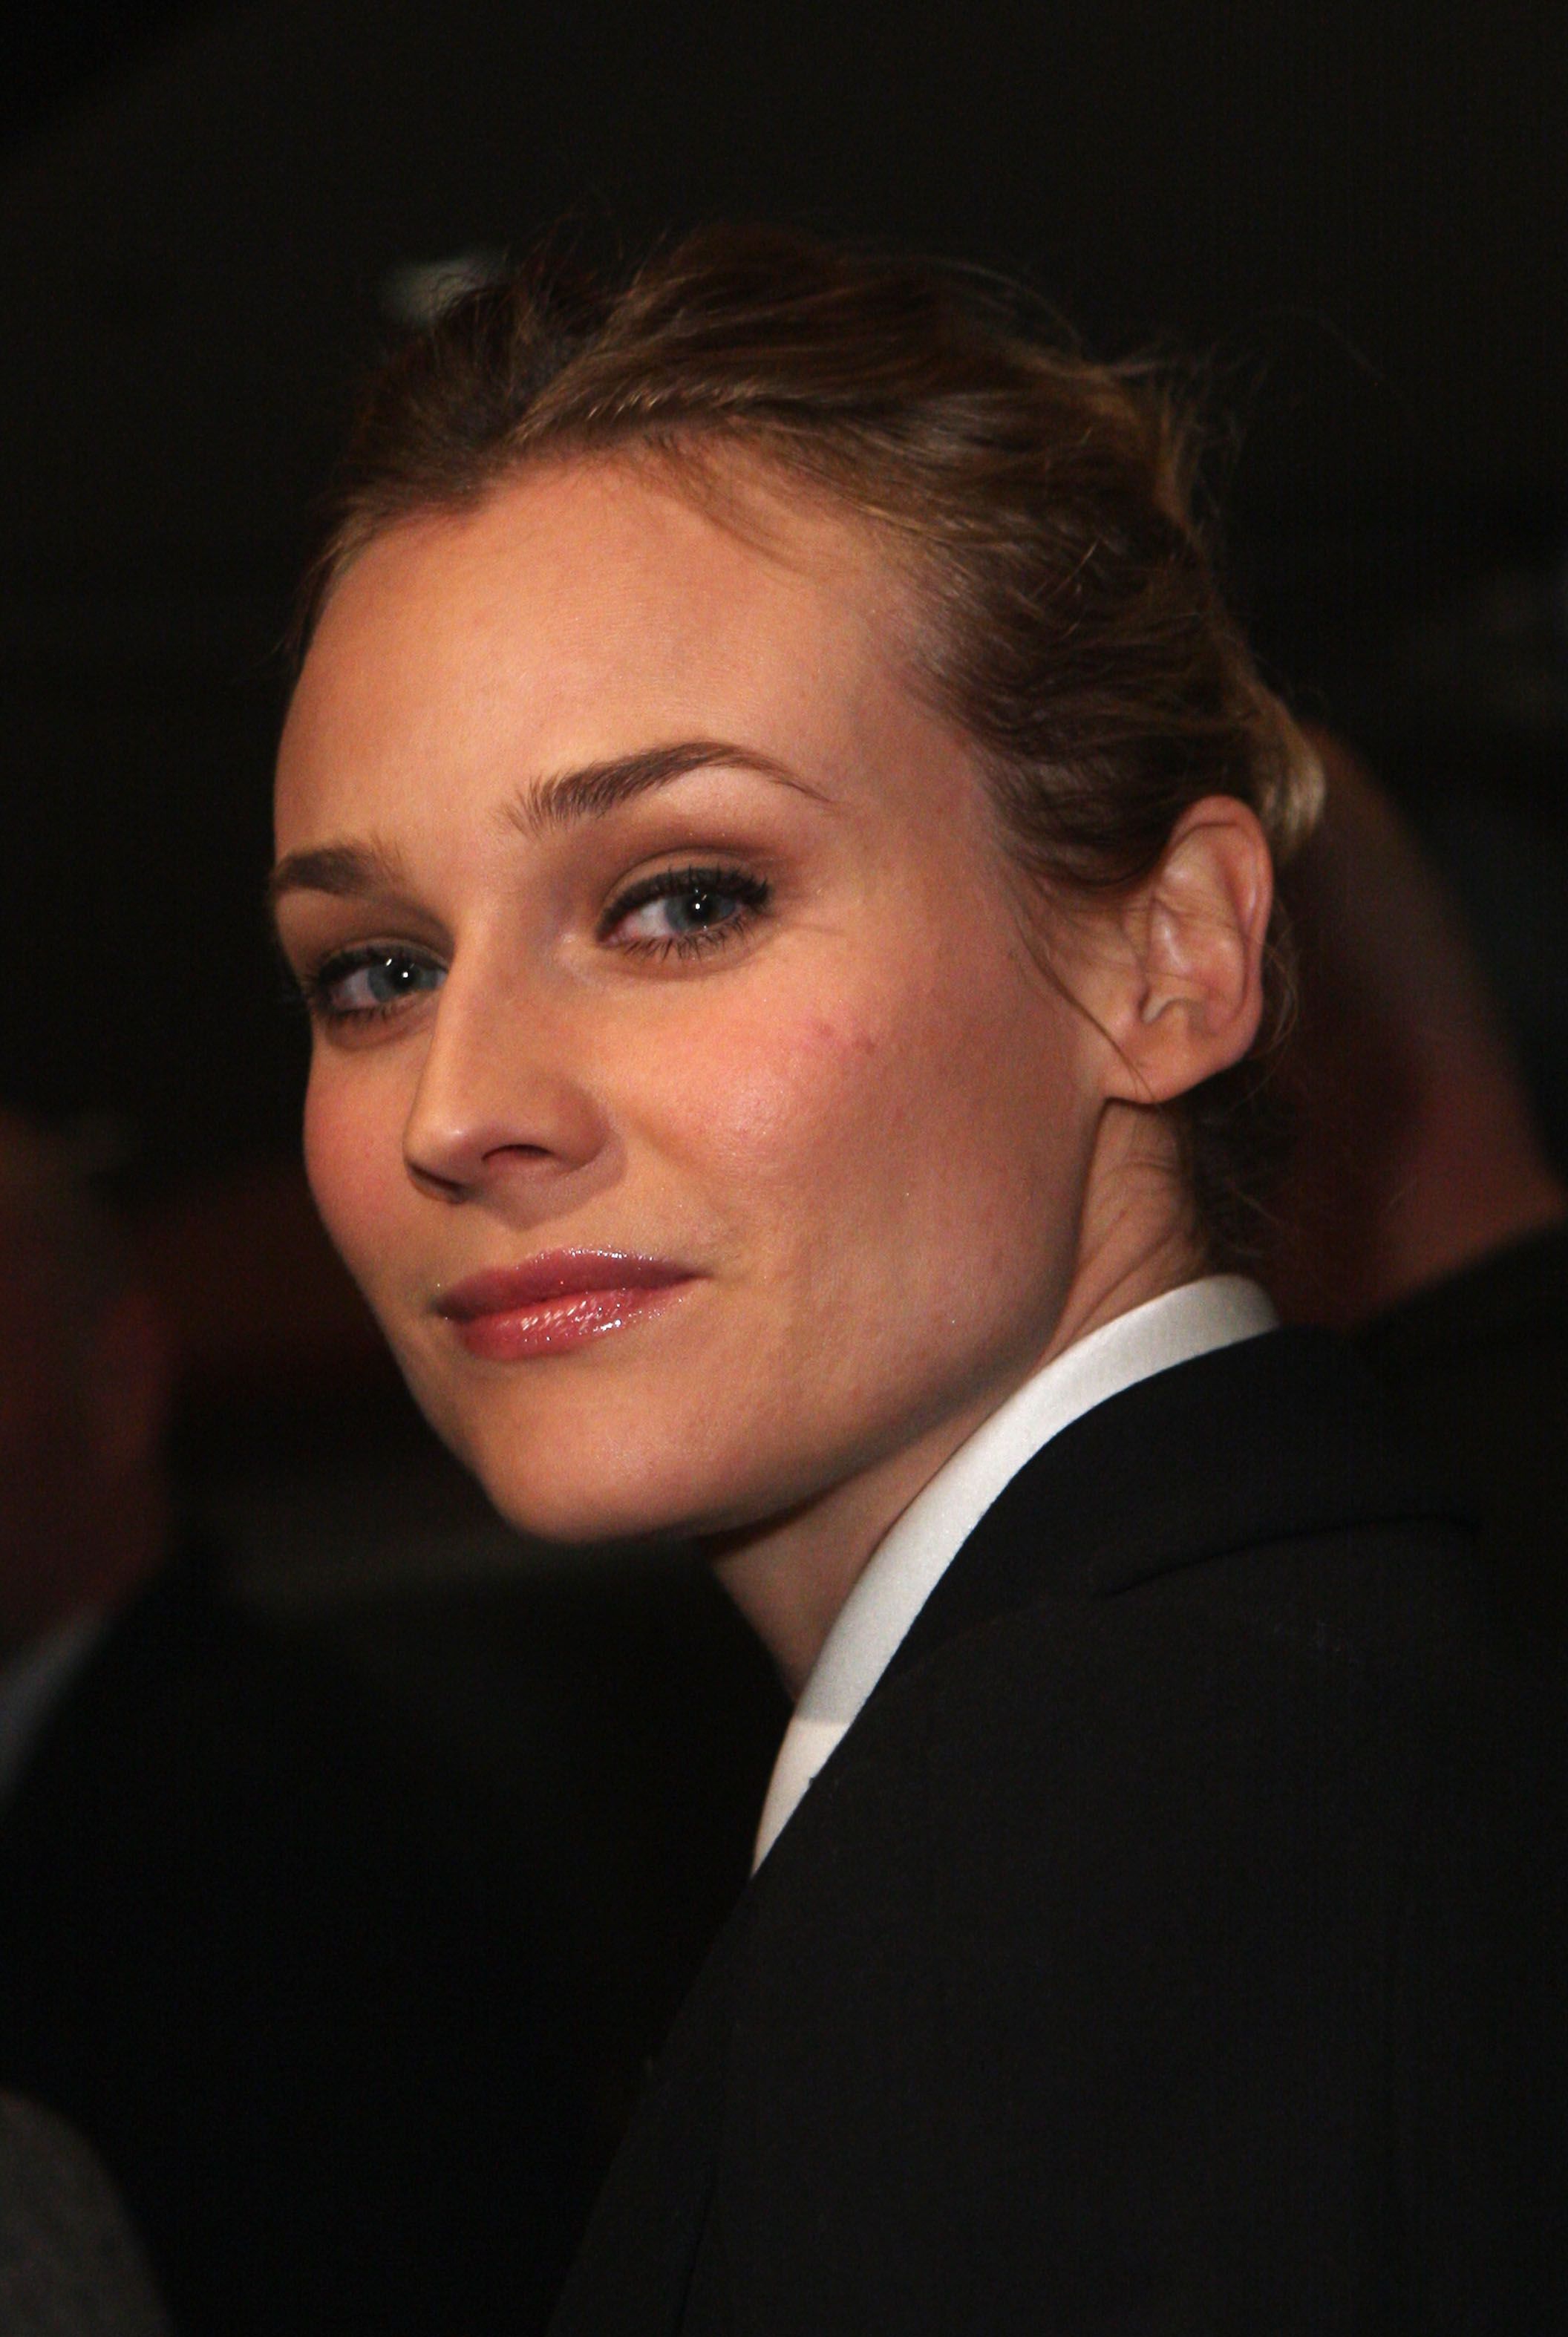 Diane Kruger Says She 'Felt Like Meat' During a Screen Test for 'Troy